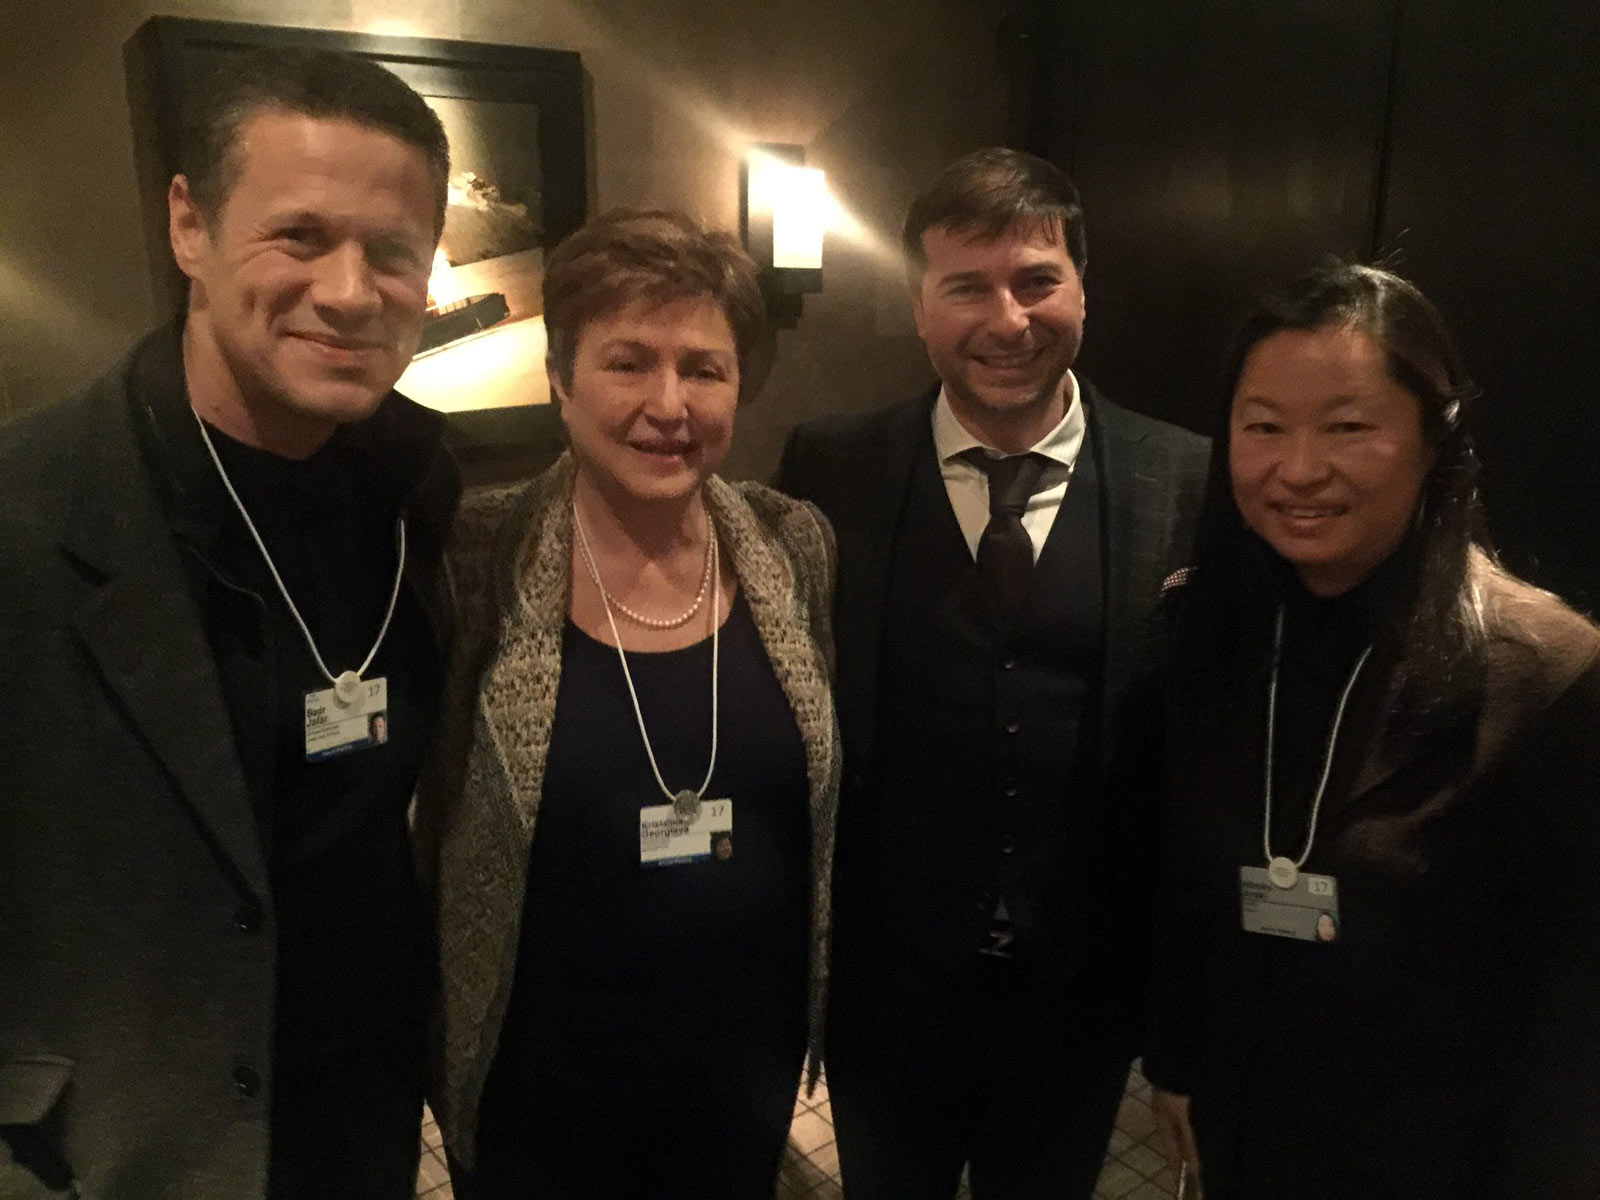 Plamen Russev with former European Commissioner and CEO of the World Bank Kristalina Georgieva